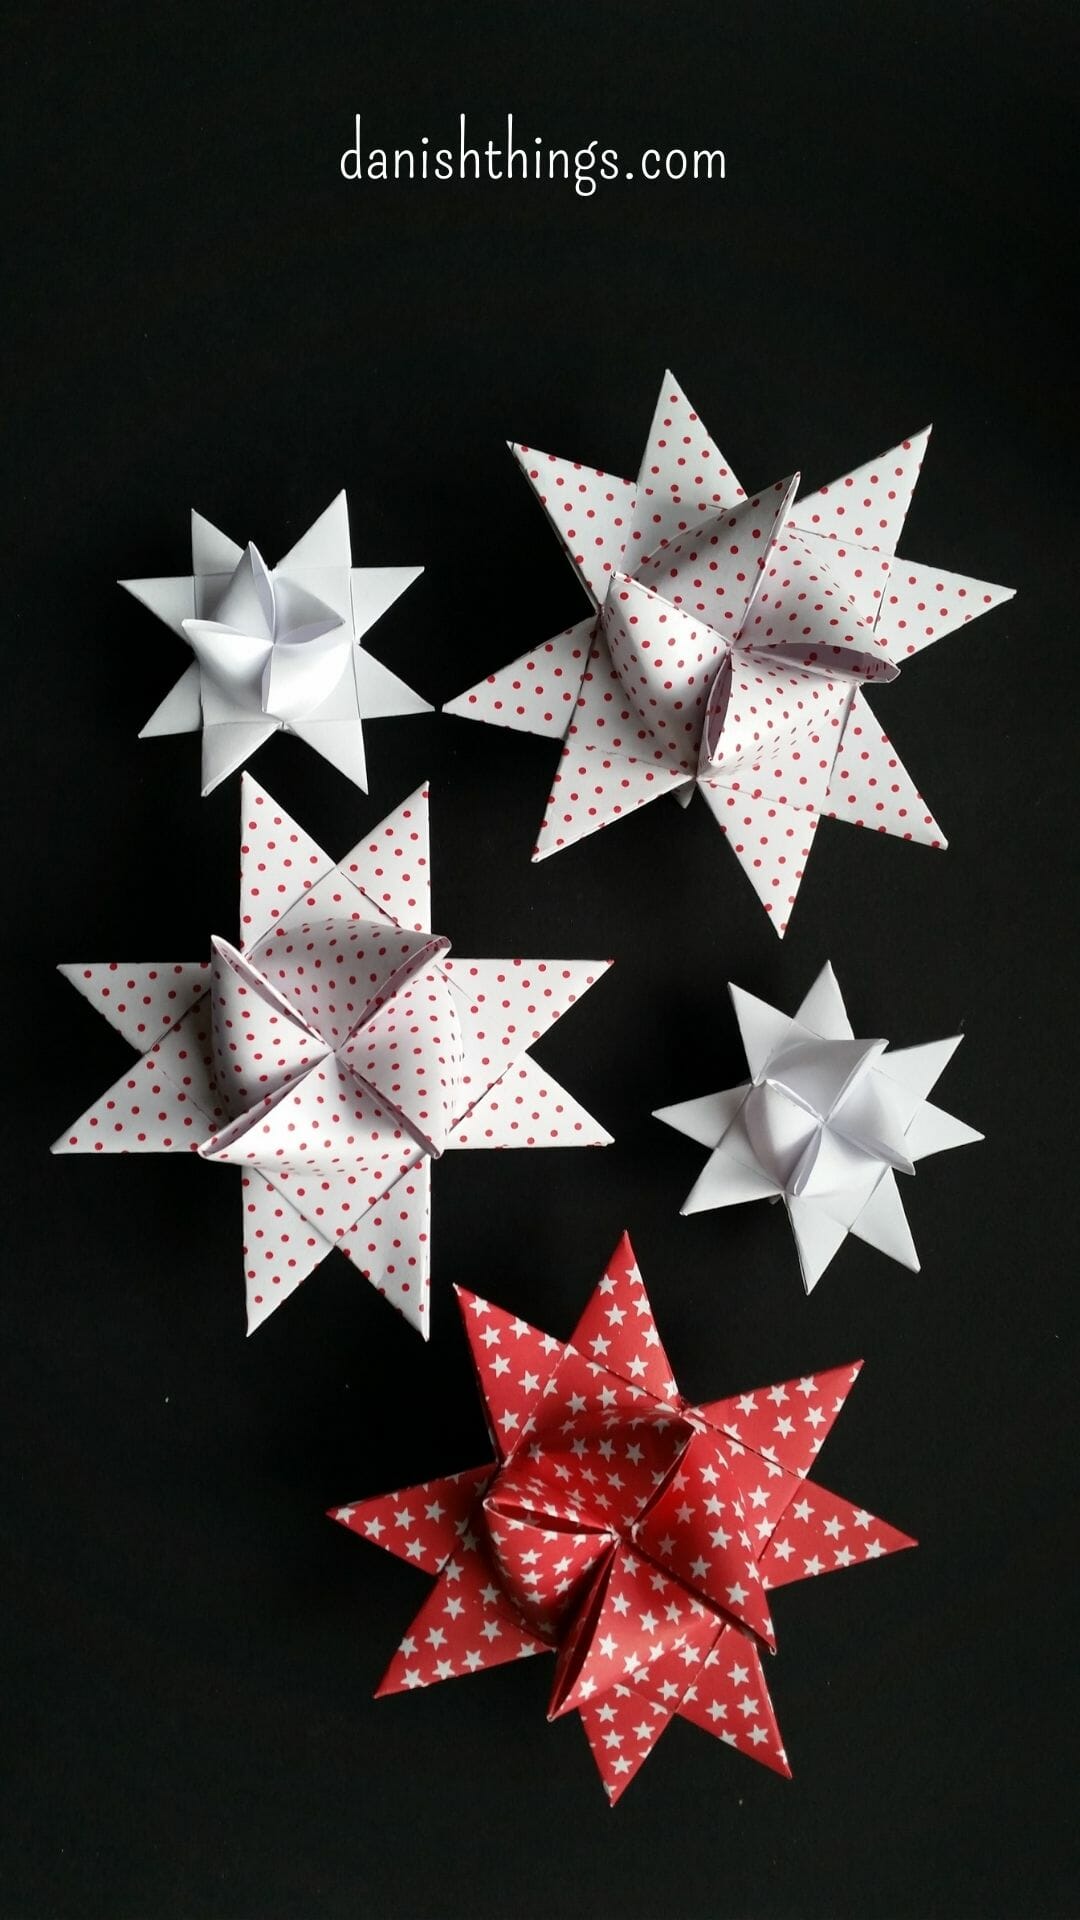 How to make a Froebel star - a classic Danish Christmas decoration. A Christmas star - step-by-step guide. Whether you weave or fold paper stars, if you are a beginner or experienced, you will get help with text, photos, and videos for every step. Find recipes, step-by-step guides, free print, and inspiration for this time of year at danishthings.com © Christel Parby - Danish Things #DanishThings #froebelstar #frobelstern #paperstar #paper #star #howto #howtoguide #danish #christmas #decoration #homemade #decoration #danishchristmas #danishstar #adventstar #advent #nordic #german #christmasstarpaper #star #howto #howtoguide #danish #christmas #christmasstar #decoration #homemade #decoration #danishchristmas #danishstar #adventstar 